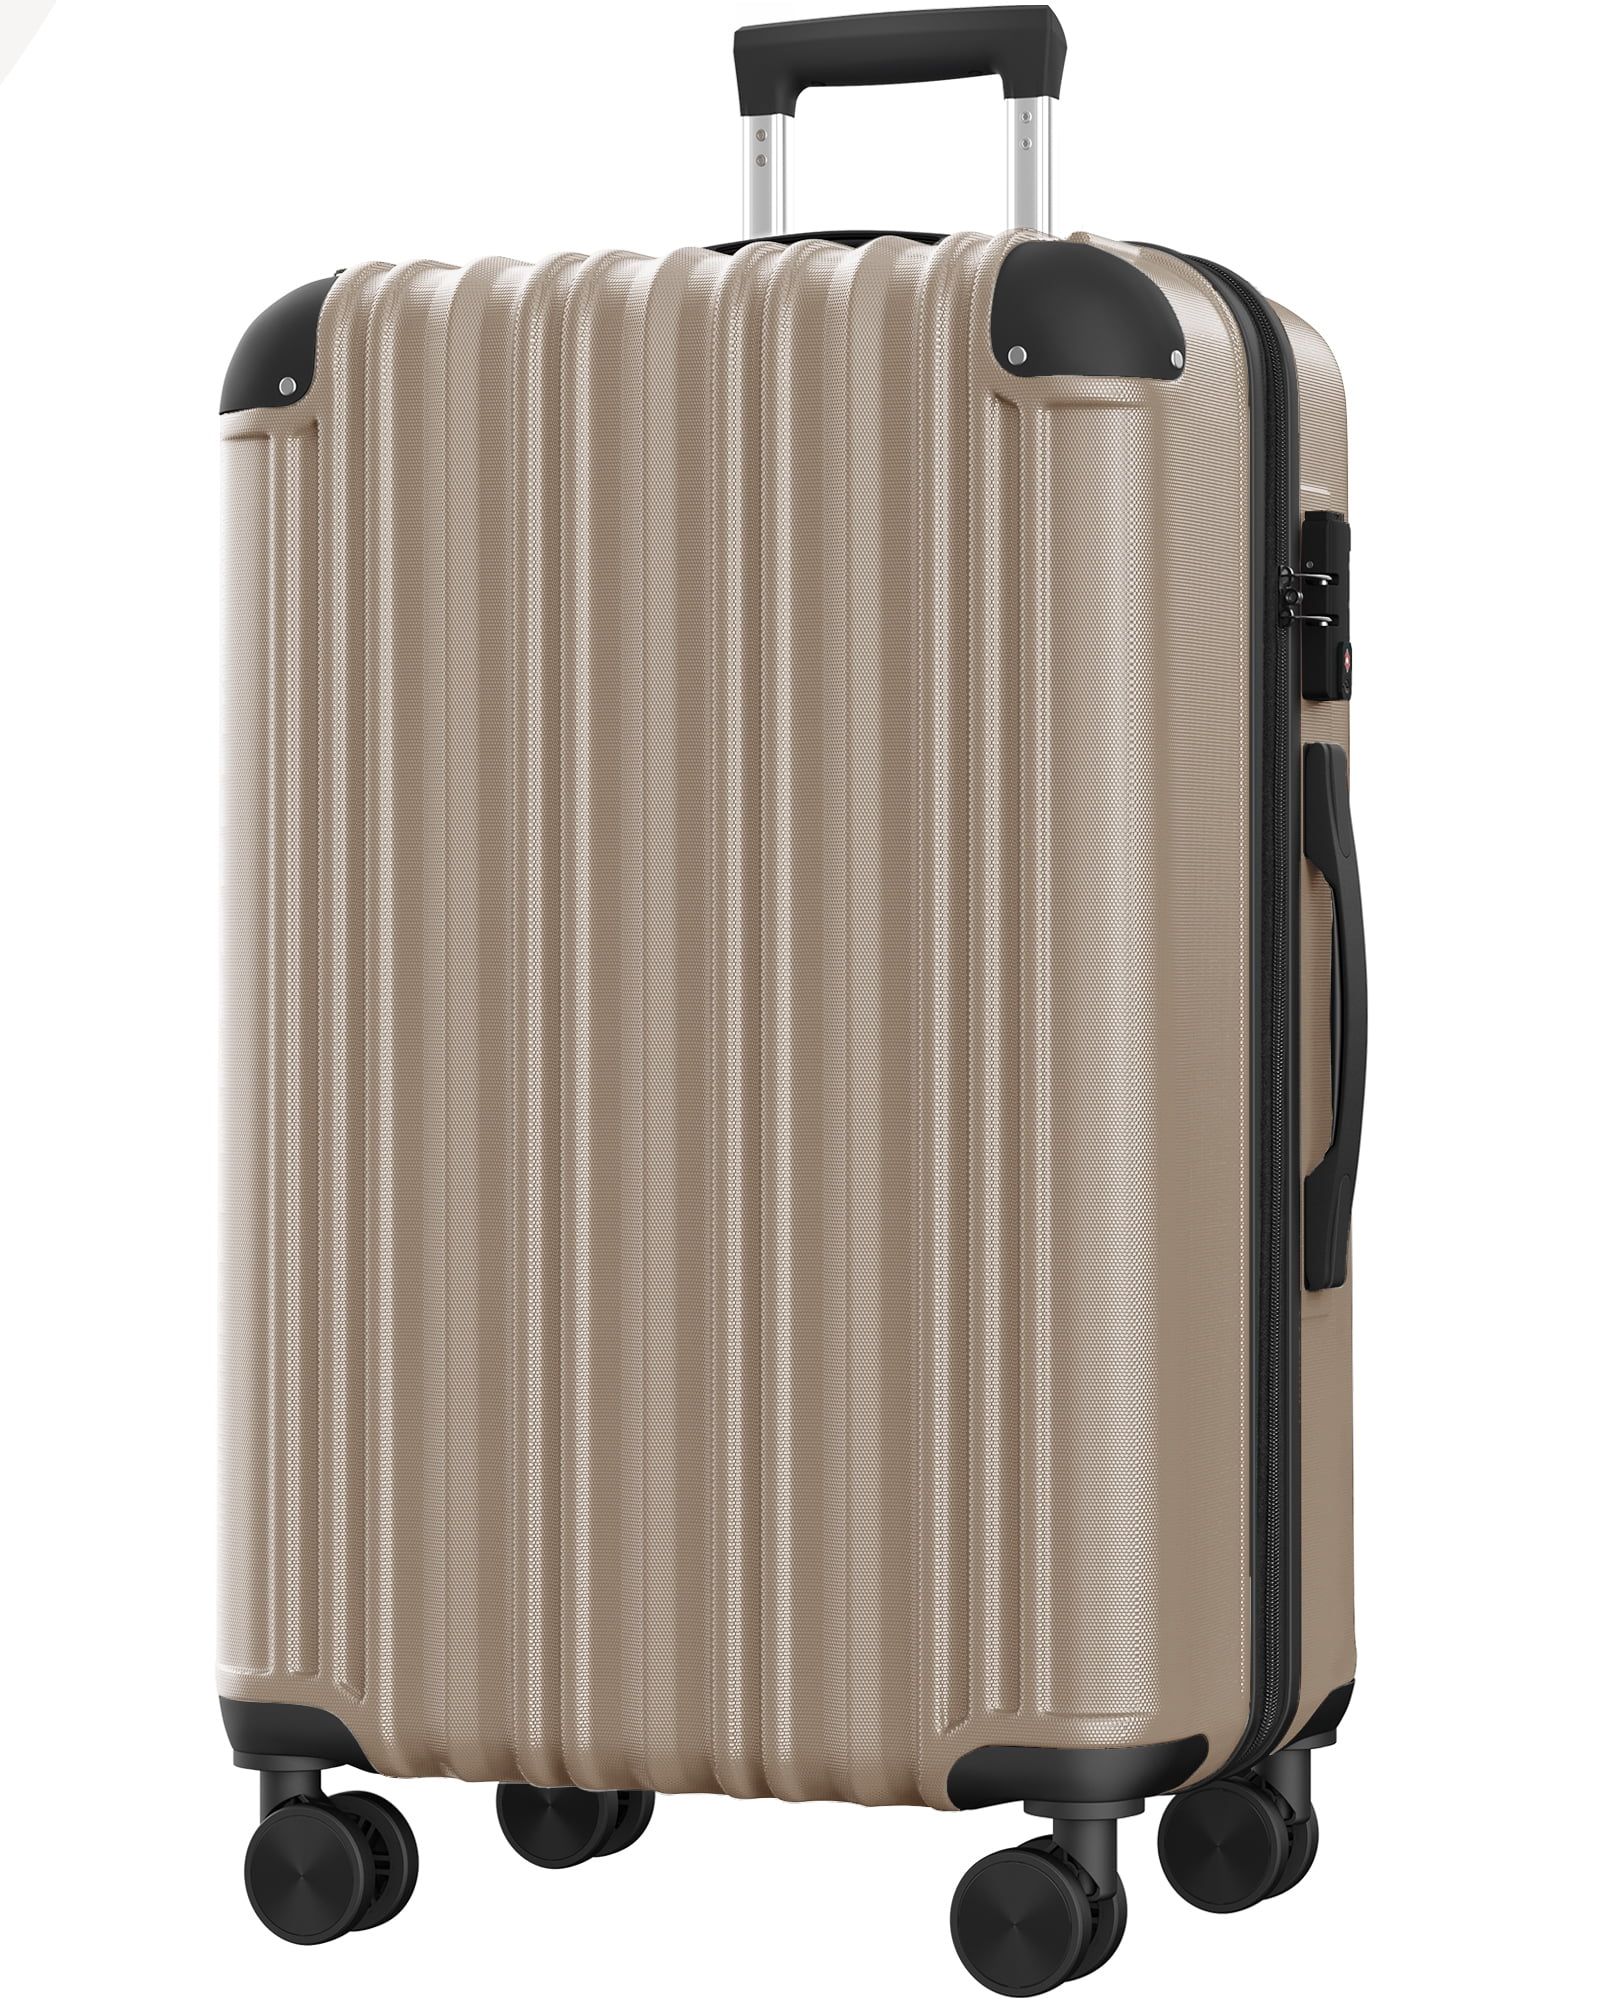 Hardside Expandable Spinner Luggage, 28" Checked Suitcase with Wheels, Champagne | Walmart (US)